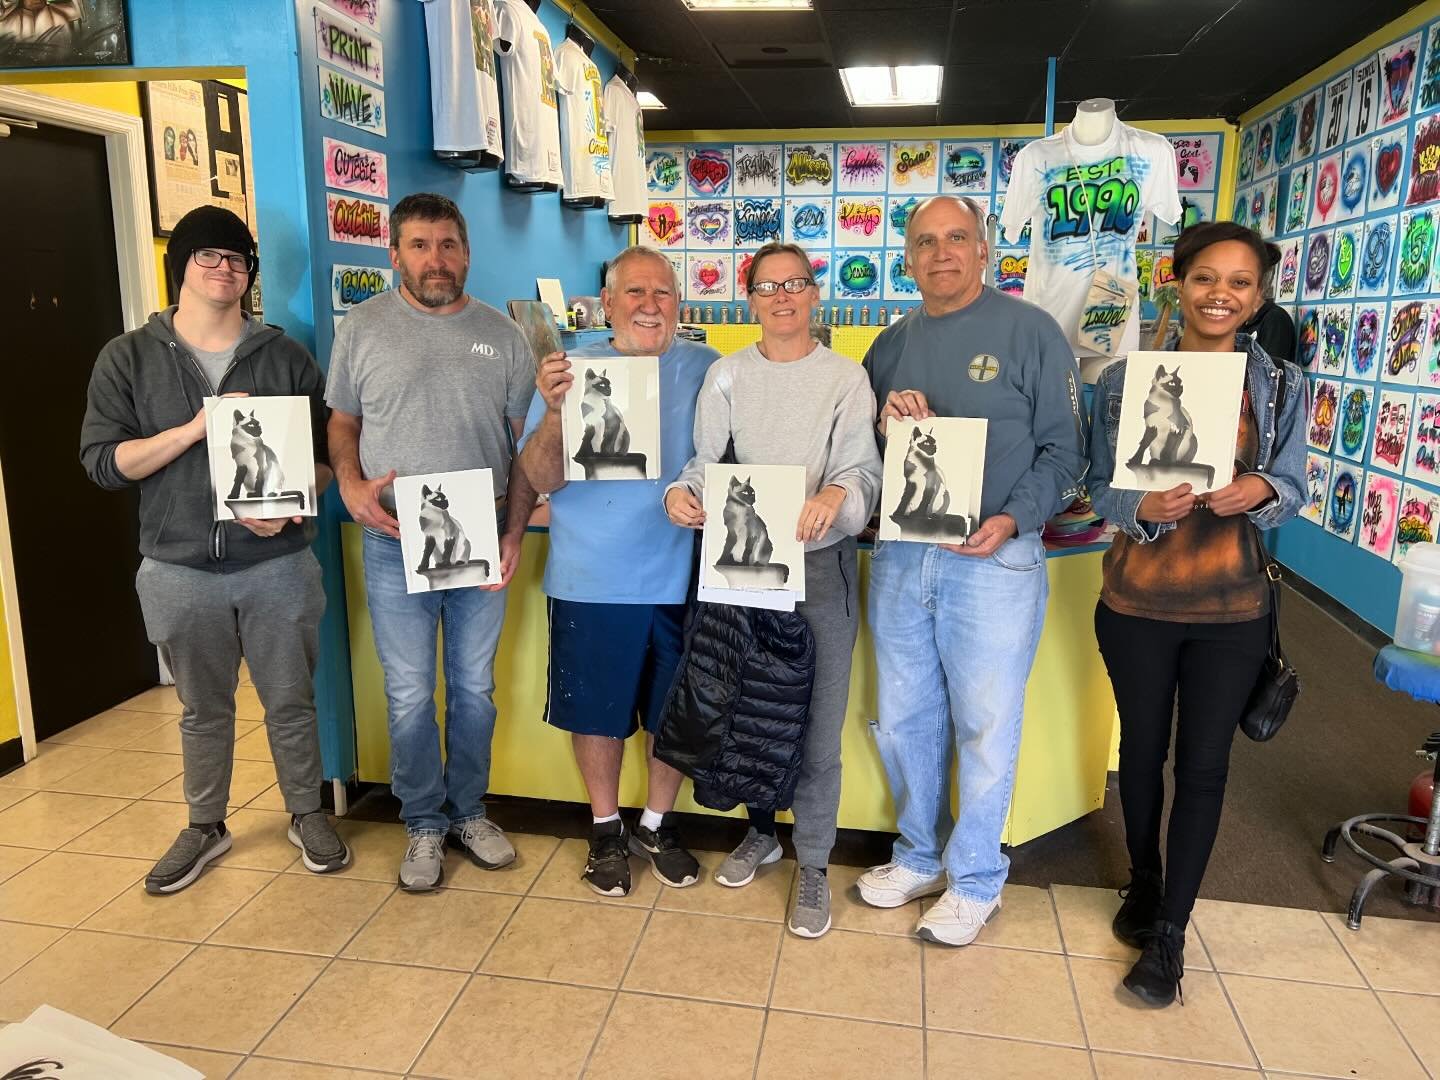 Our last workshop of Spring 2024 went great.  A great bunch of students that did a great job with this challenging art.  Looking forward to Summer workshops.
Visit our website for more info... www.anythingairbrushed.com
.
.
.
#airbrushclass #airbrush